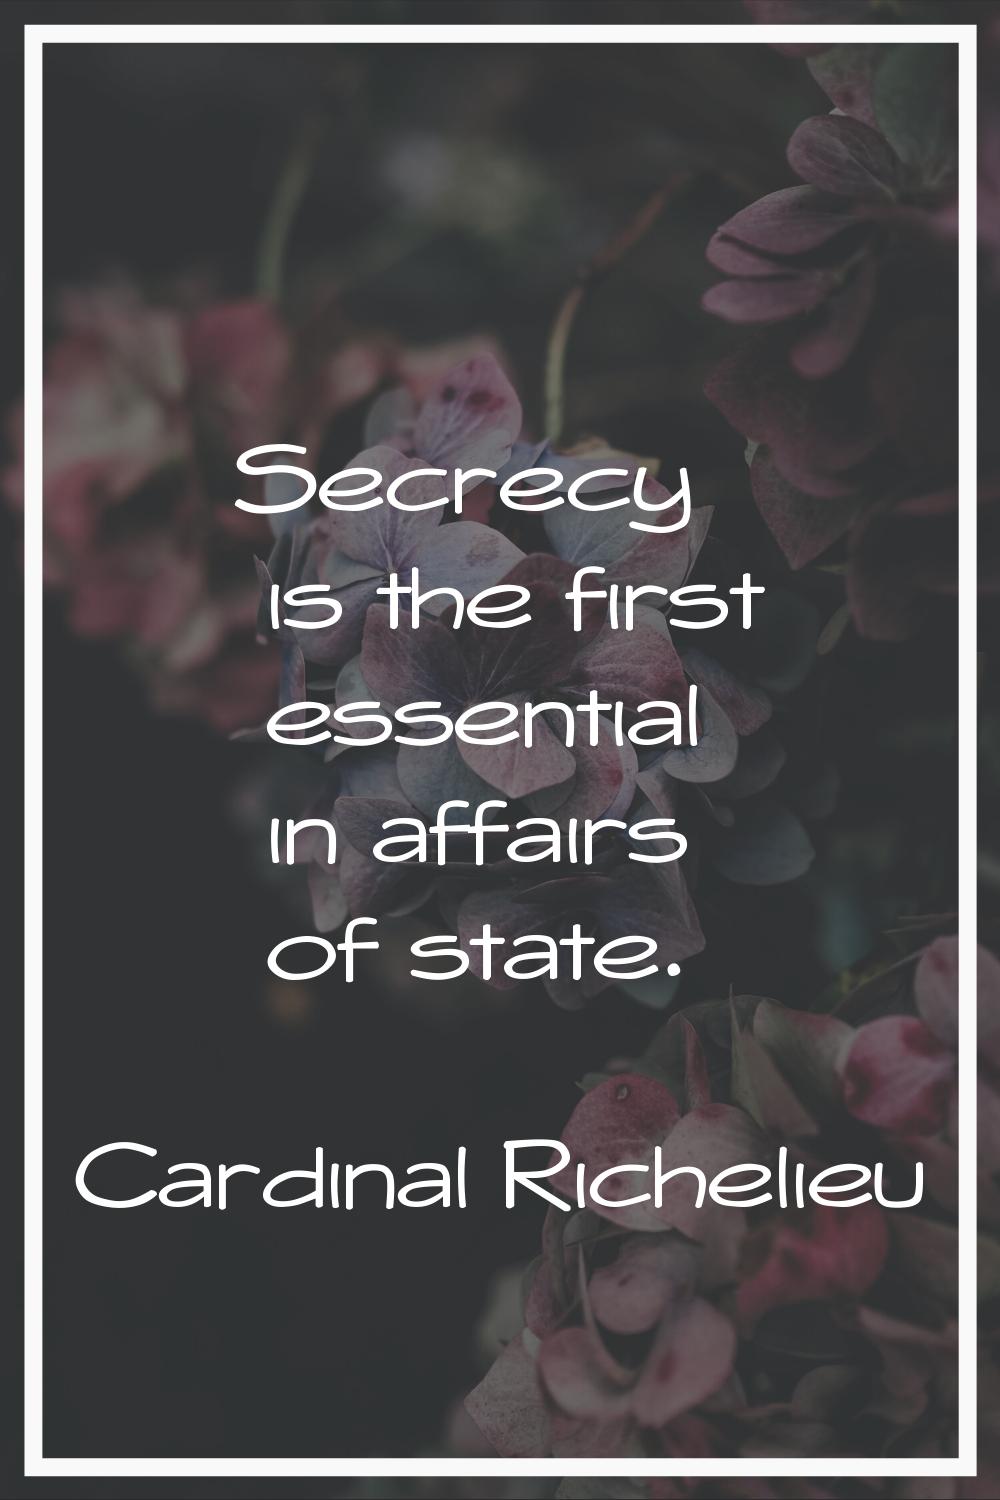 Secrecy is the first essential in affairs of state.